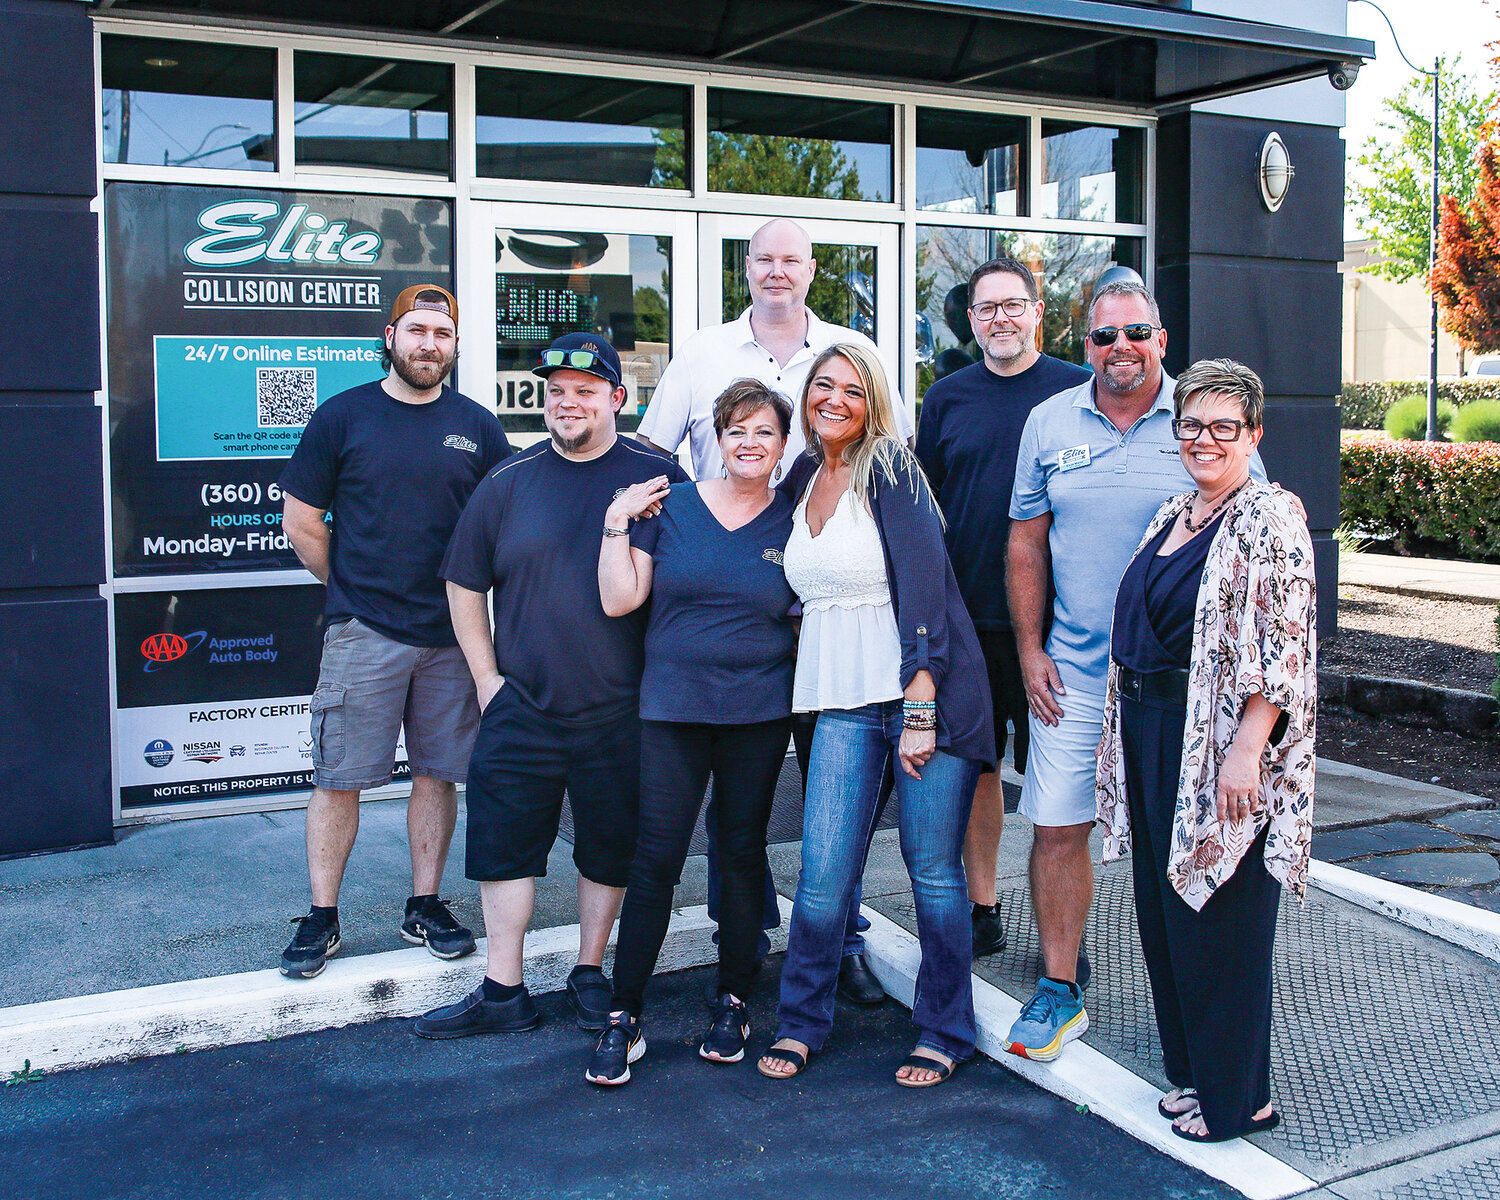 Staff members with Elite Collision Center in Battle Ground gather and pose during their 20 year anniversary celebration on Wednesday, June 7.